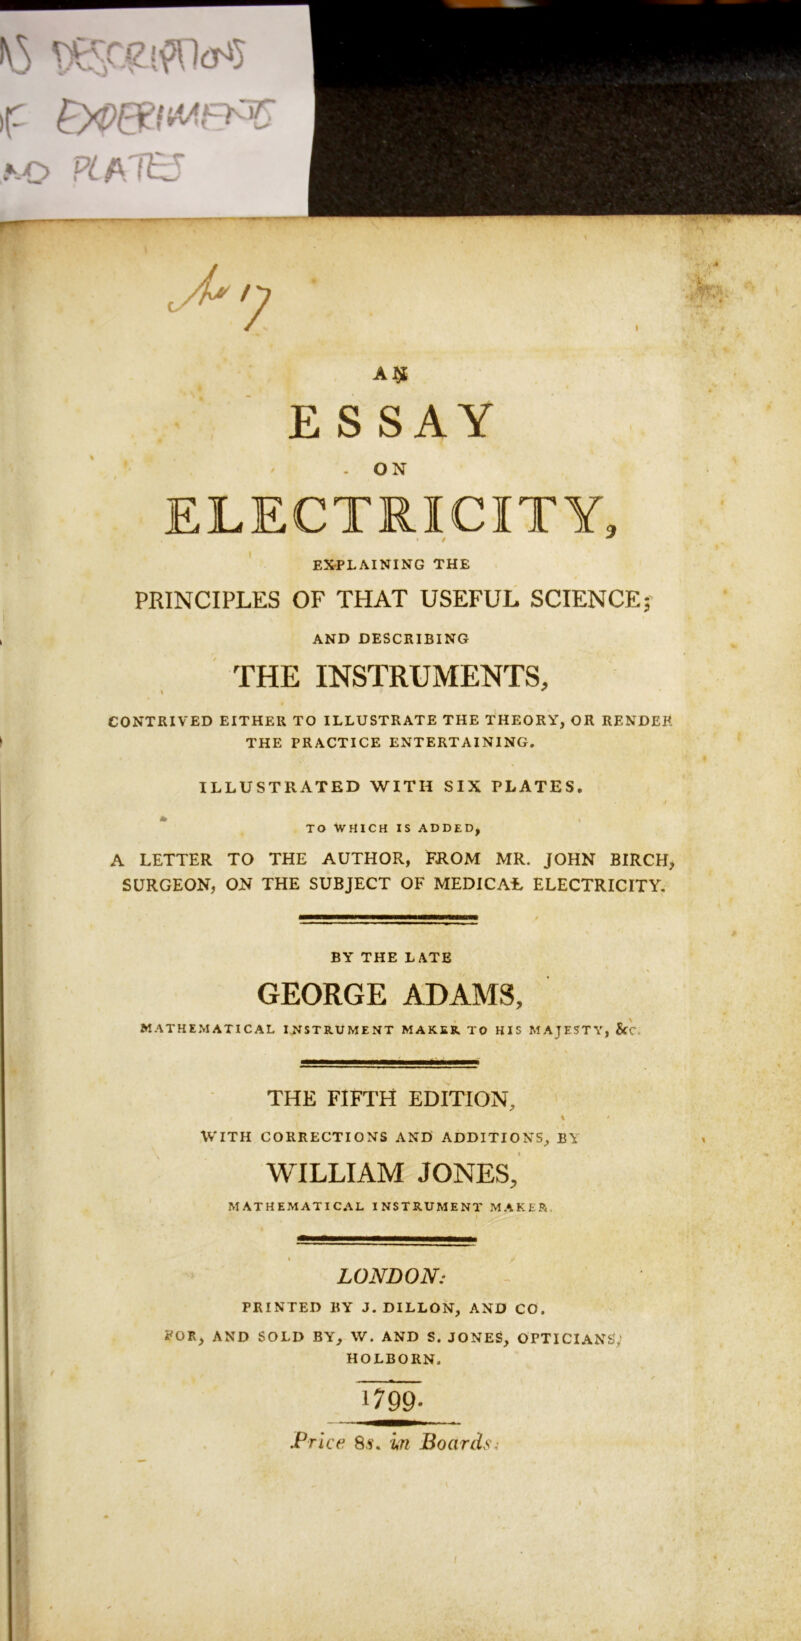 A^^ ESSAY . ON ELECTRICITY, / ^ ' EXPLAINING THE PRINCIPLES OF THAT USEFUL SCIENCE5 » AND DESCRIBING THE INSTRUMENTS, CONTRIVED EITHER TO ILLUSTRATE THE THEORY, OR RENDER \ THE PRACTICE ENTERTAINING. ILLUSTRATED WITH SIX PLATES, * TO WHICH IS ADDED, A LETTER TO THE AUTHOR, FROM MR. JOHN BIRCH SURGEON, ON THE SUBJECT OF MEDICAL ELECTRICITY, BY THE LATE GEORGE ADAMS, MATHE.MATICAL INSTRUMENT MAKER TO HIS MAJESTY, &'c. THE fifth edition, WITH CORRECTIONS AND ADDITIONS, BY WILLIAM JONES, MATHEMATICAL INSTRUMENT MAKER, LONDON: PRINTED BY J. DILLON, AND CO. POR, AND SOLD BY, W. AND S. JONES, OPTICIANS,> HOLBORN. 1799- JPrice 8.i‘. in Boards: